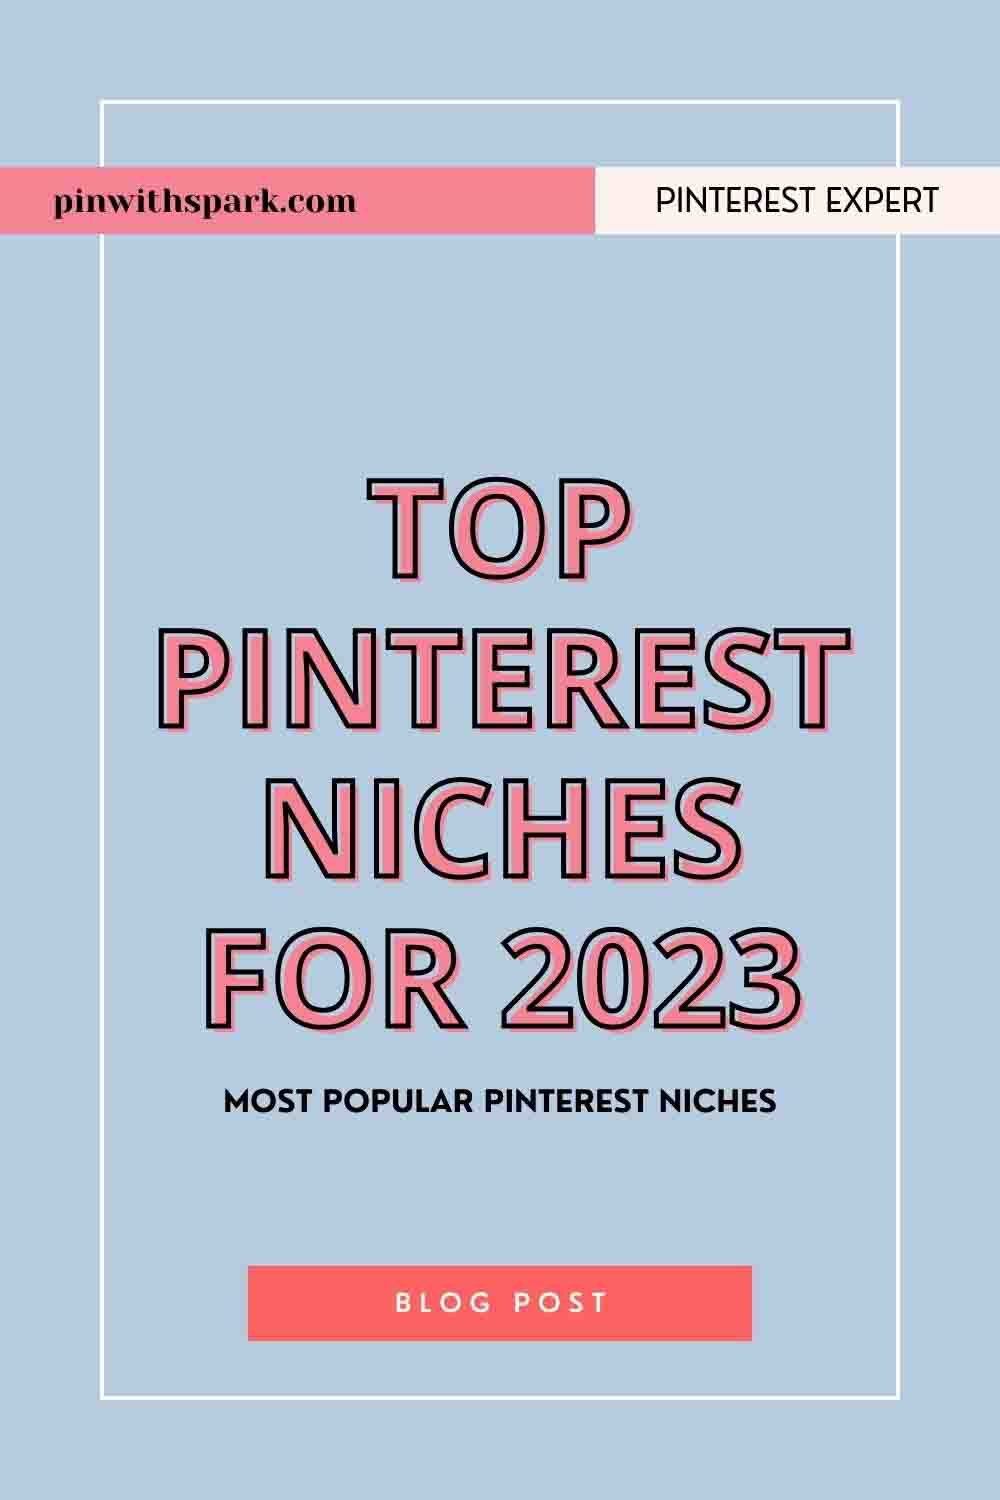 Top Pinterest niches in 2023 text overlay pinwithspark.com